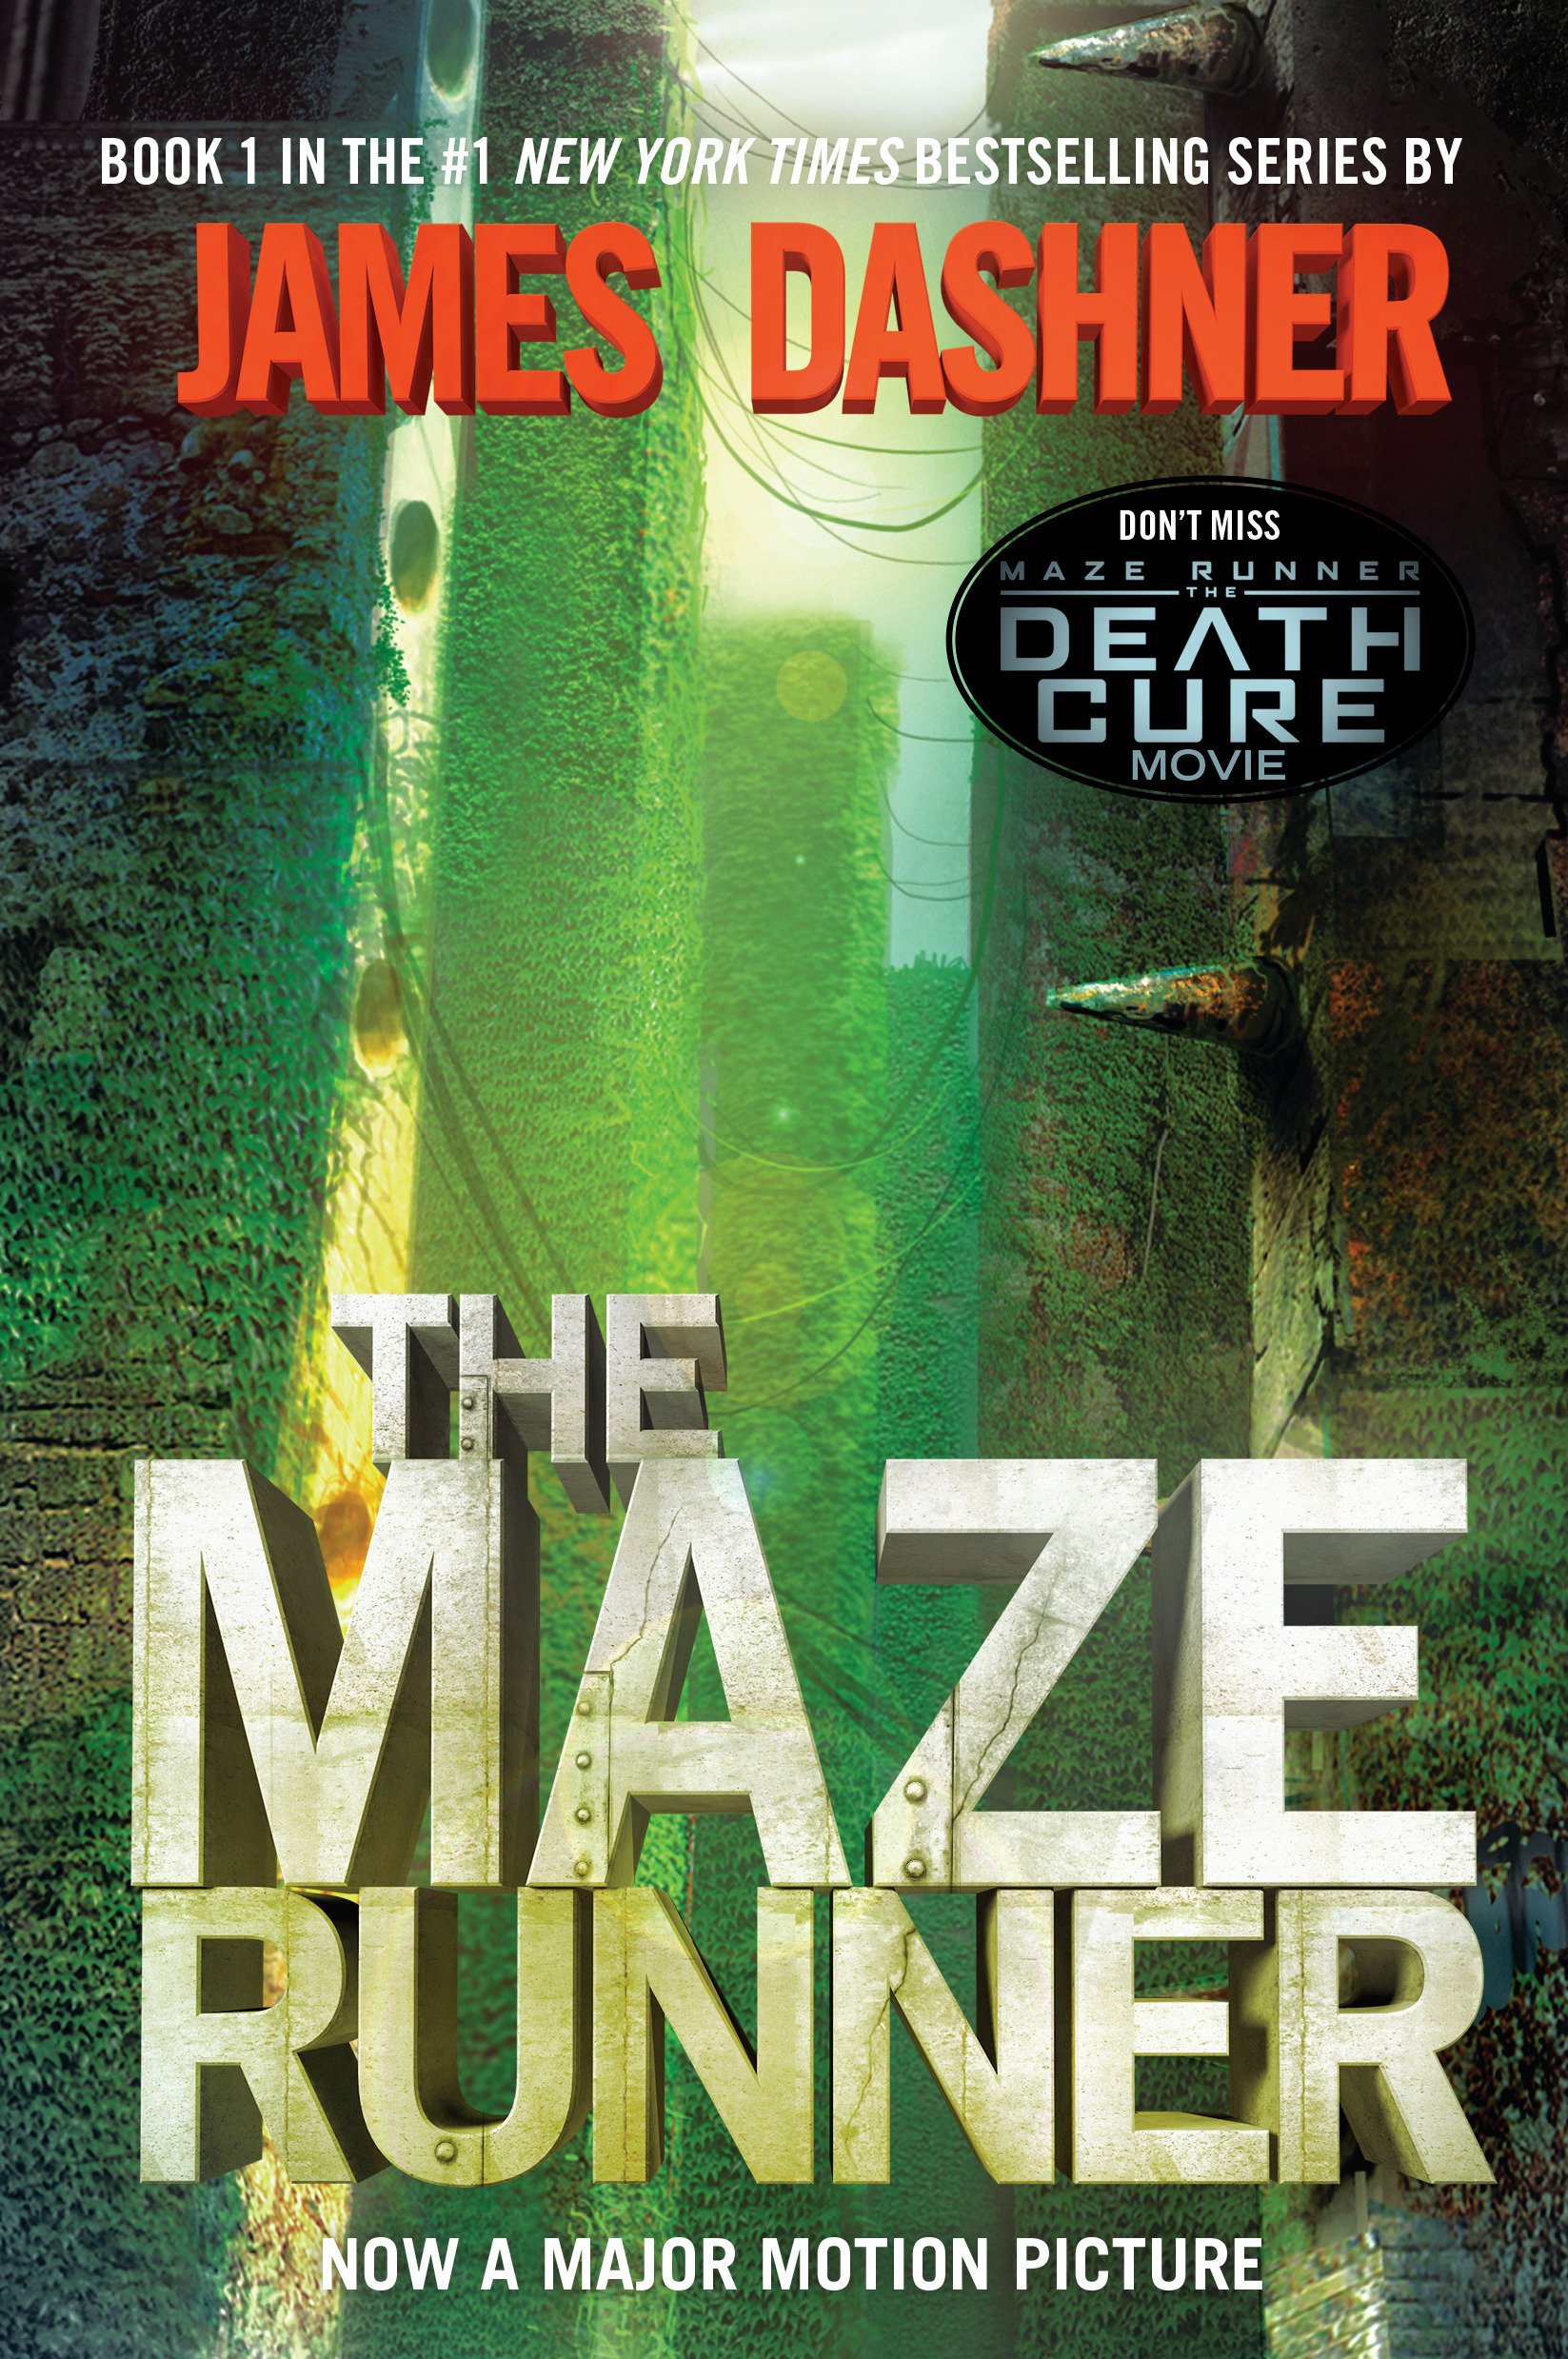 The Maze Runner Movie Review for Parents